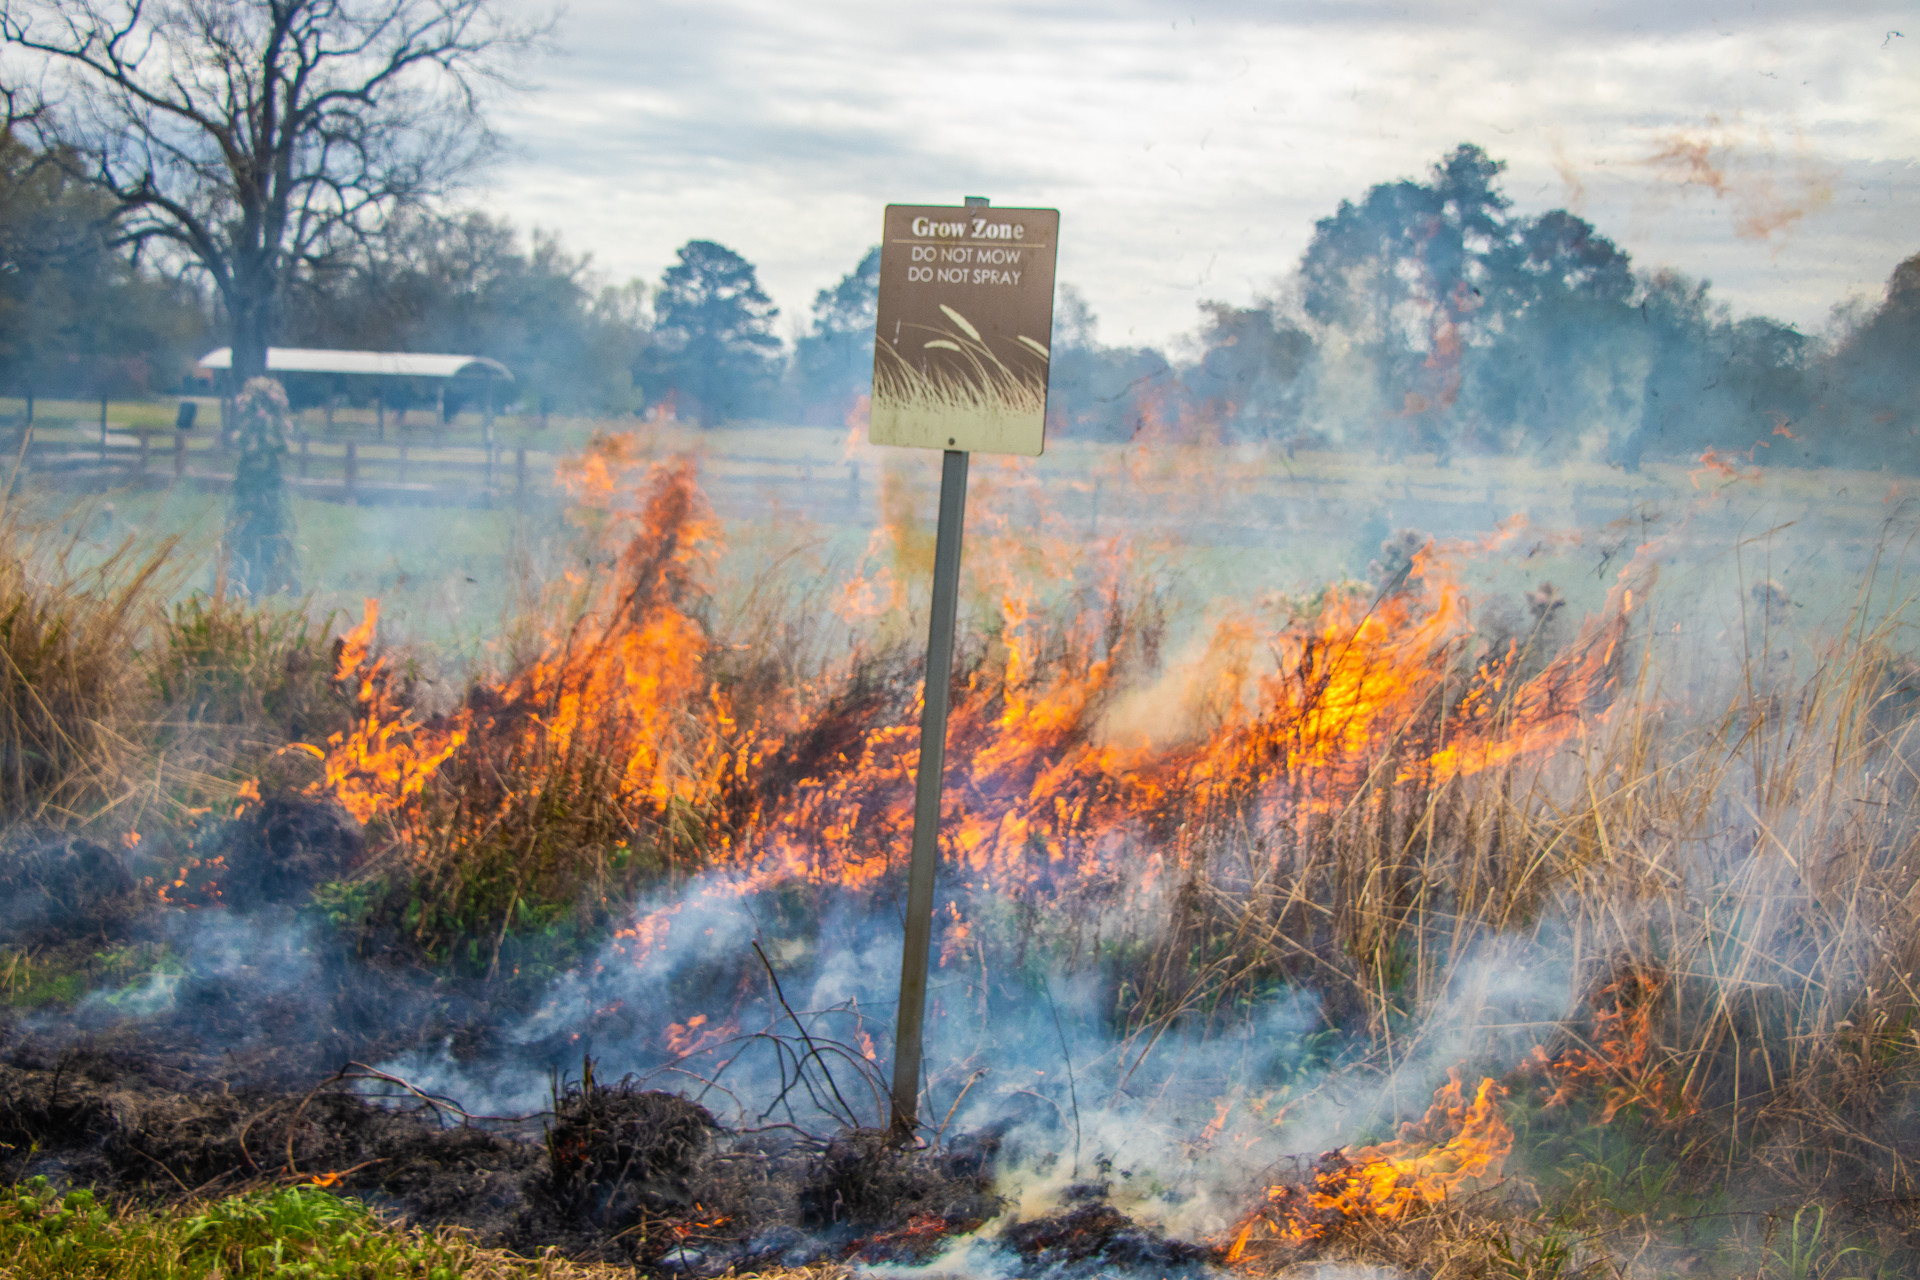 image of tall grassy area on fire with park sign in the middle